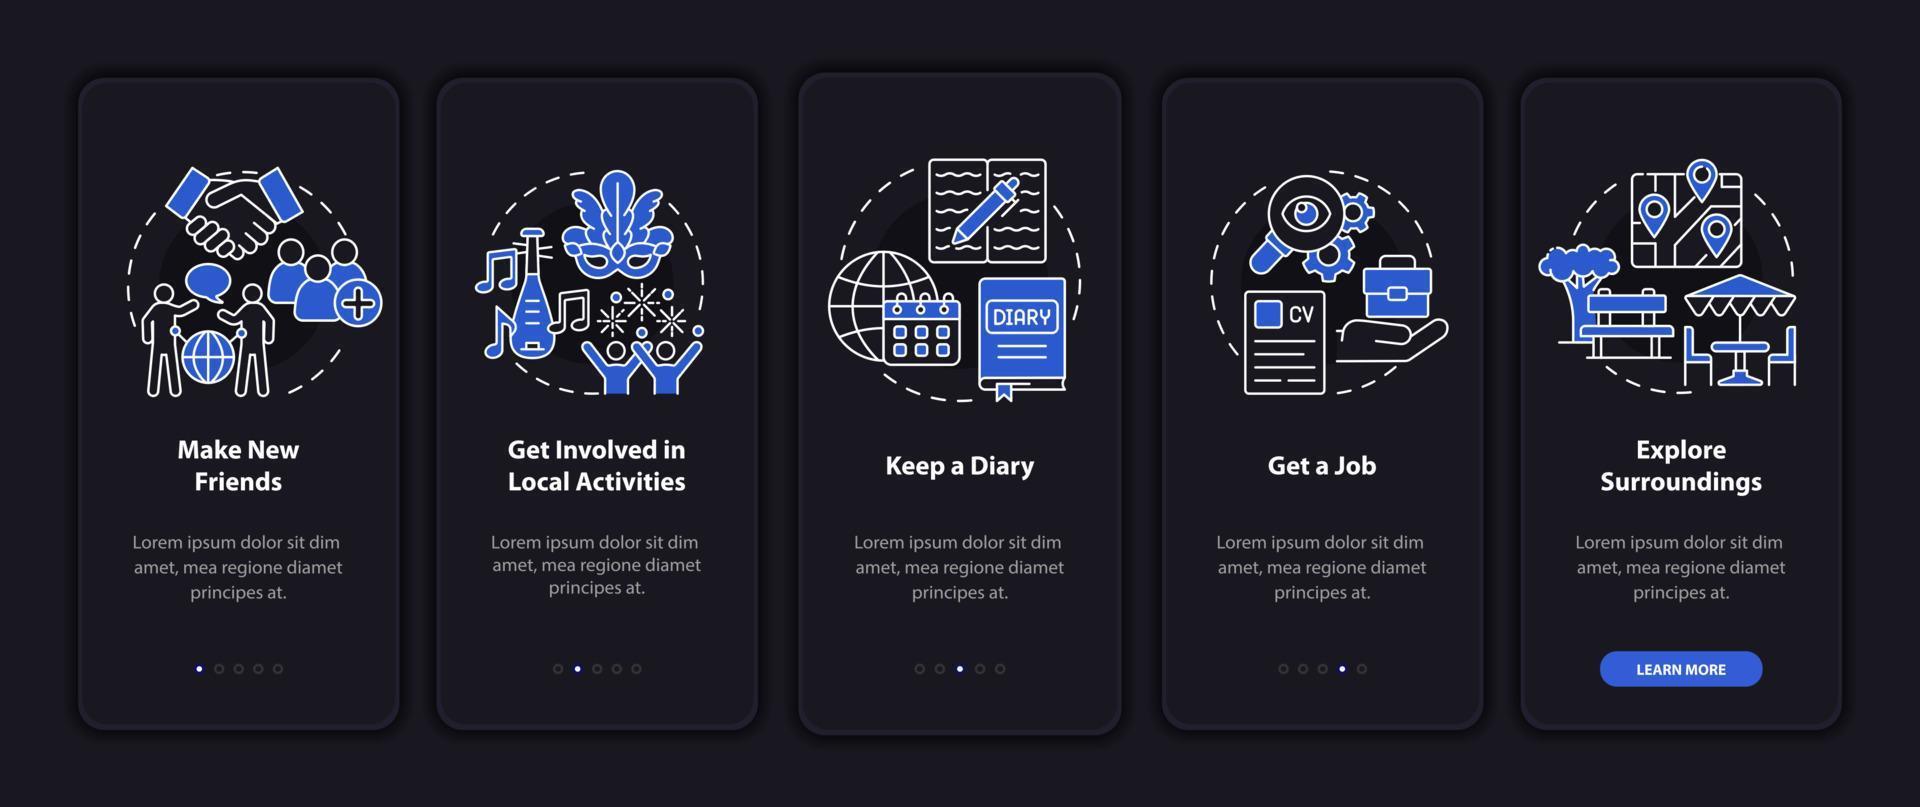 Adjusting to living abroad dark onboarding mobile app page screen. Walkthrough 5 steps graphic instructions with concepts. UI, UX, GUI vector template with linear night mode illustrations